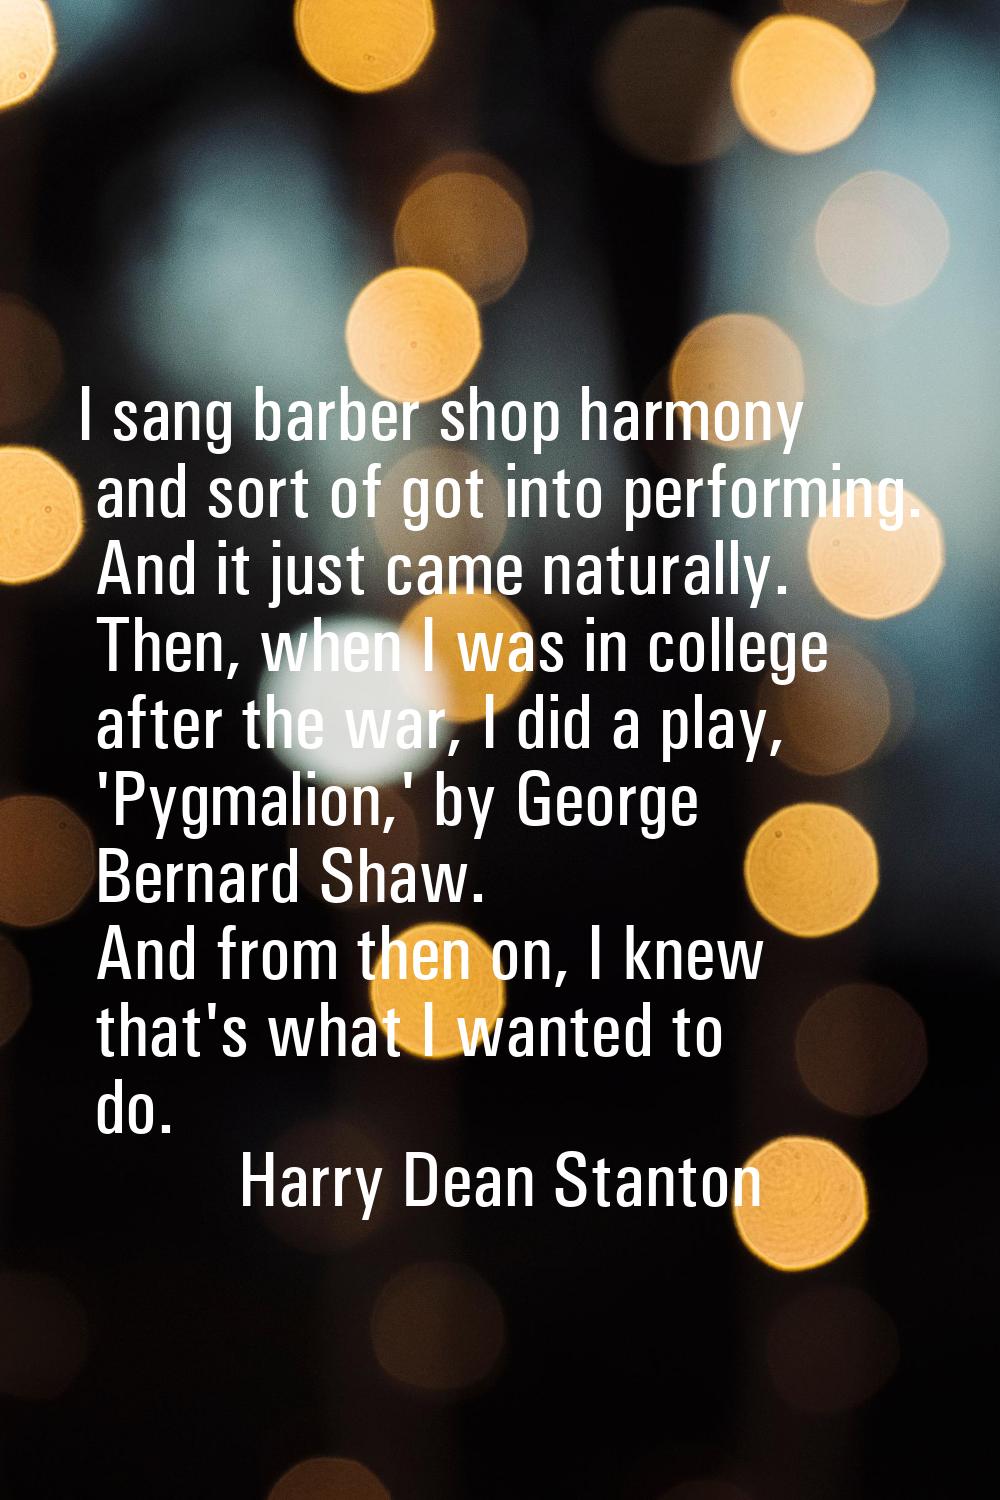 I sang barber shop harmony and sort of got into performing. And it just came naturally. Then, when 